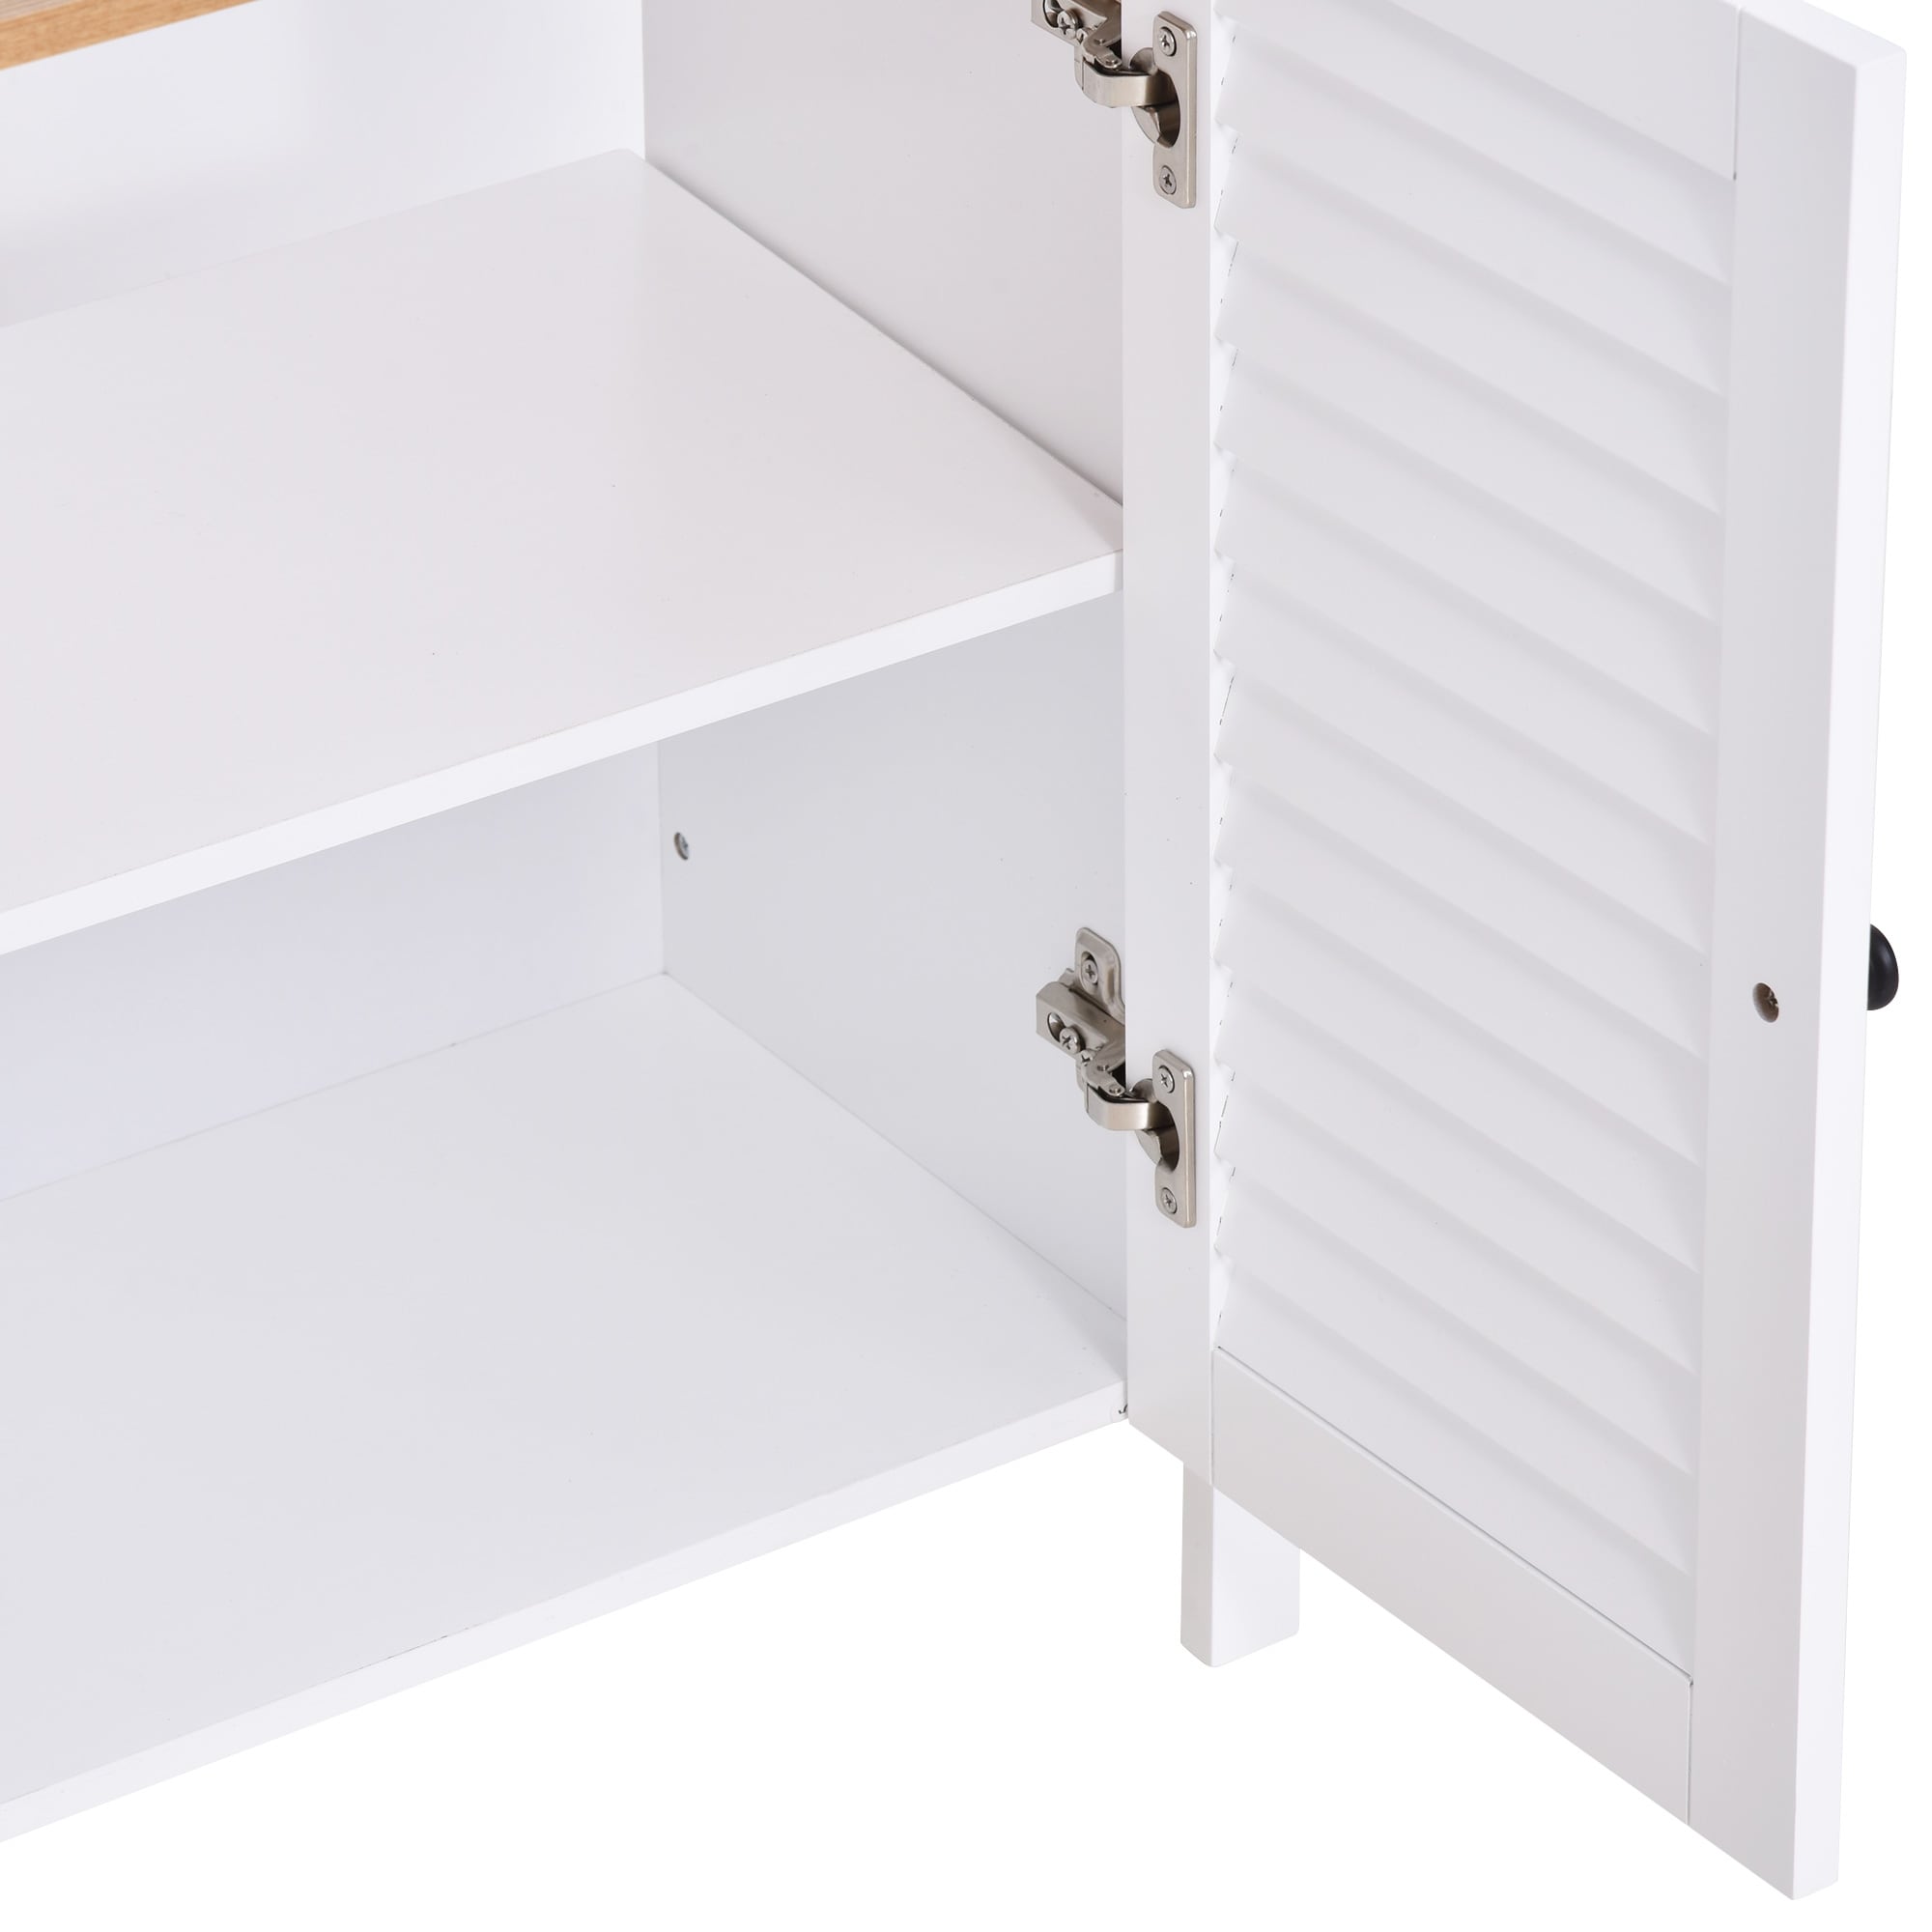 https://ak1.ostkcdn.com/images/products/is/images/direct/6e9cb296500639e799a717093924b5da2f5ae1a7/HOMCOM-Under-Sink-Storage-Cabinet-with-Double-Layers-Bathroom-Cabinet-Space-Saver-Organizer-2-Door-Floor-Cabinet%2C-White.jpg